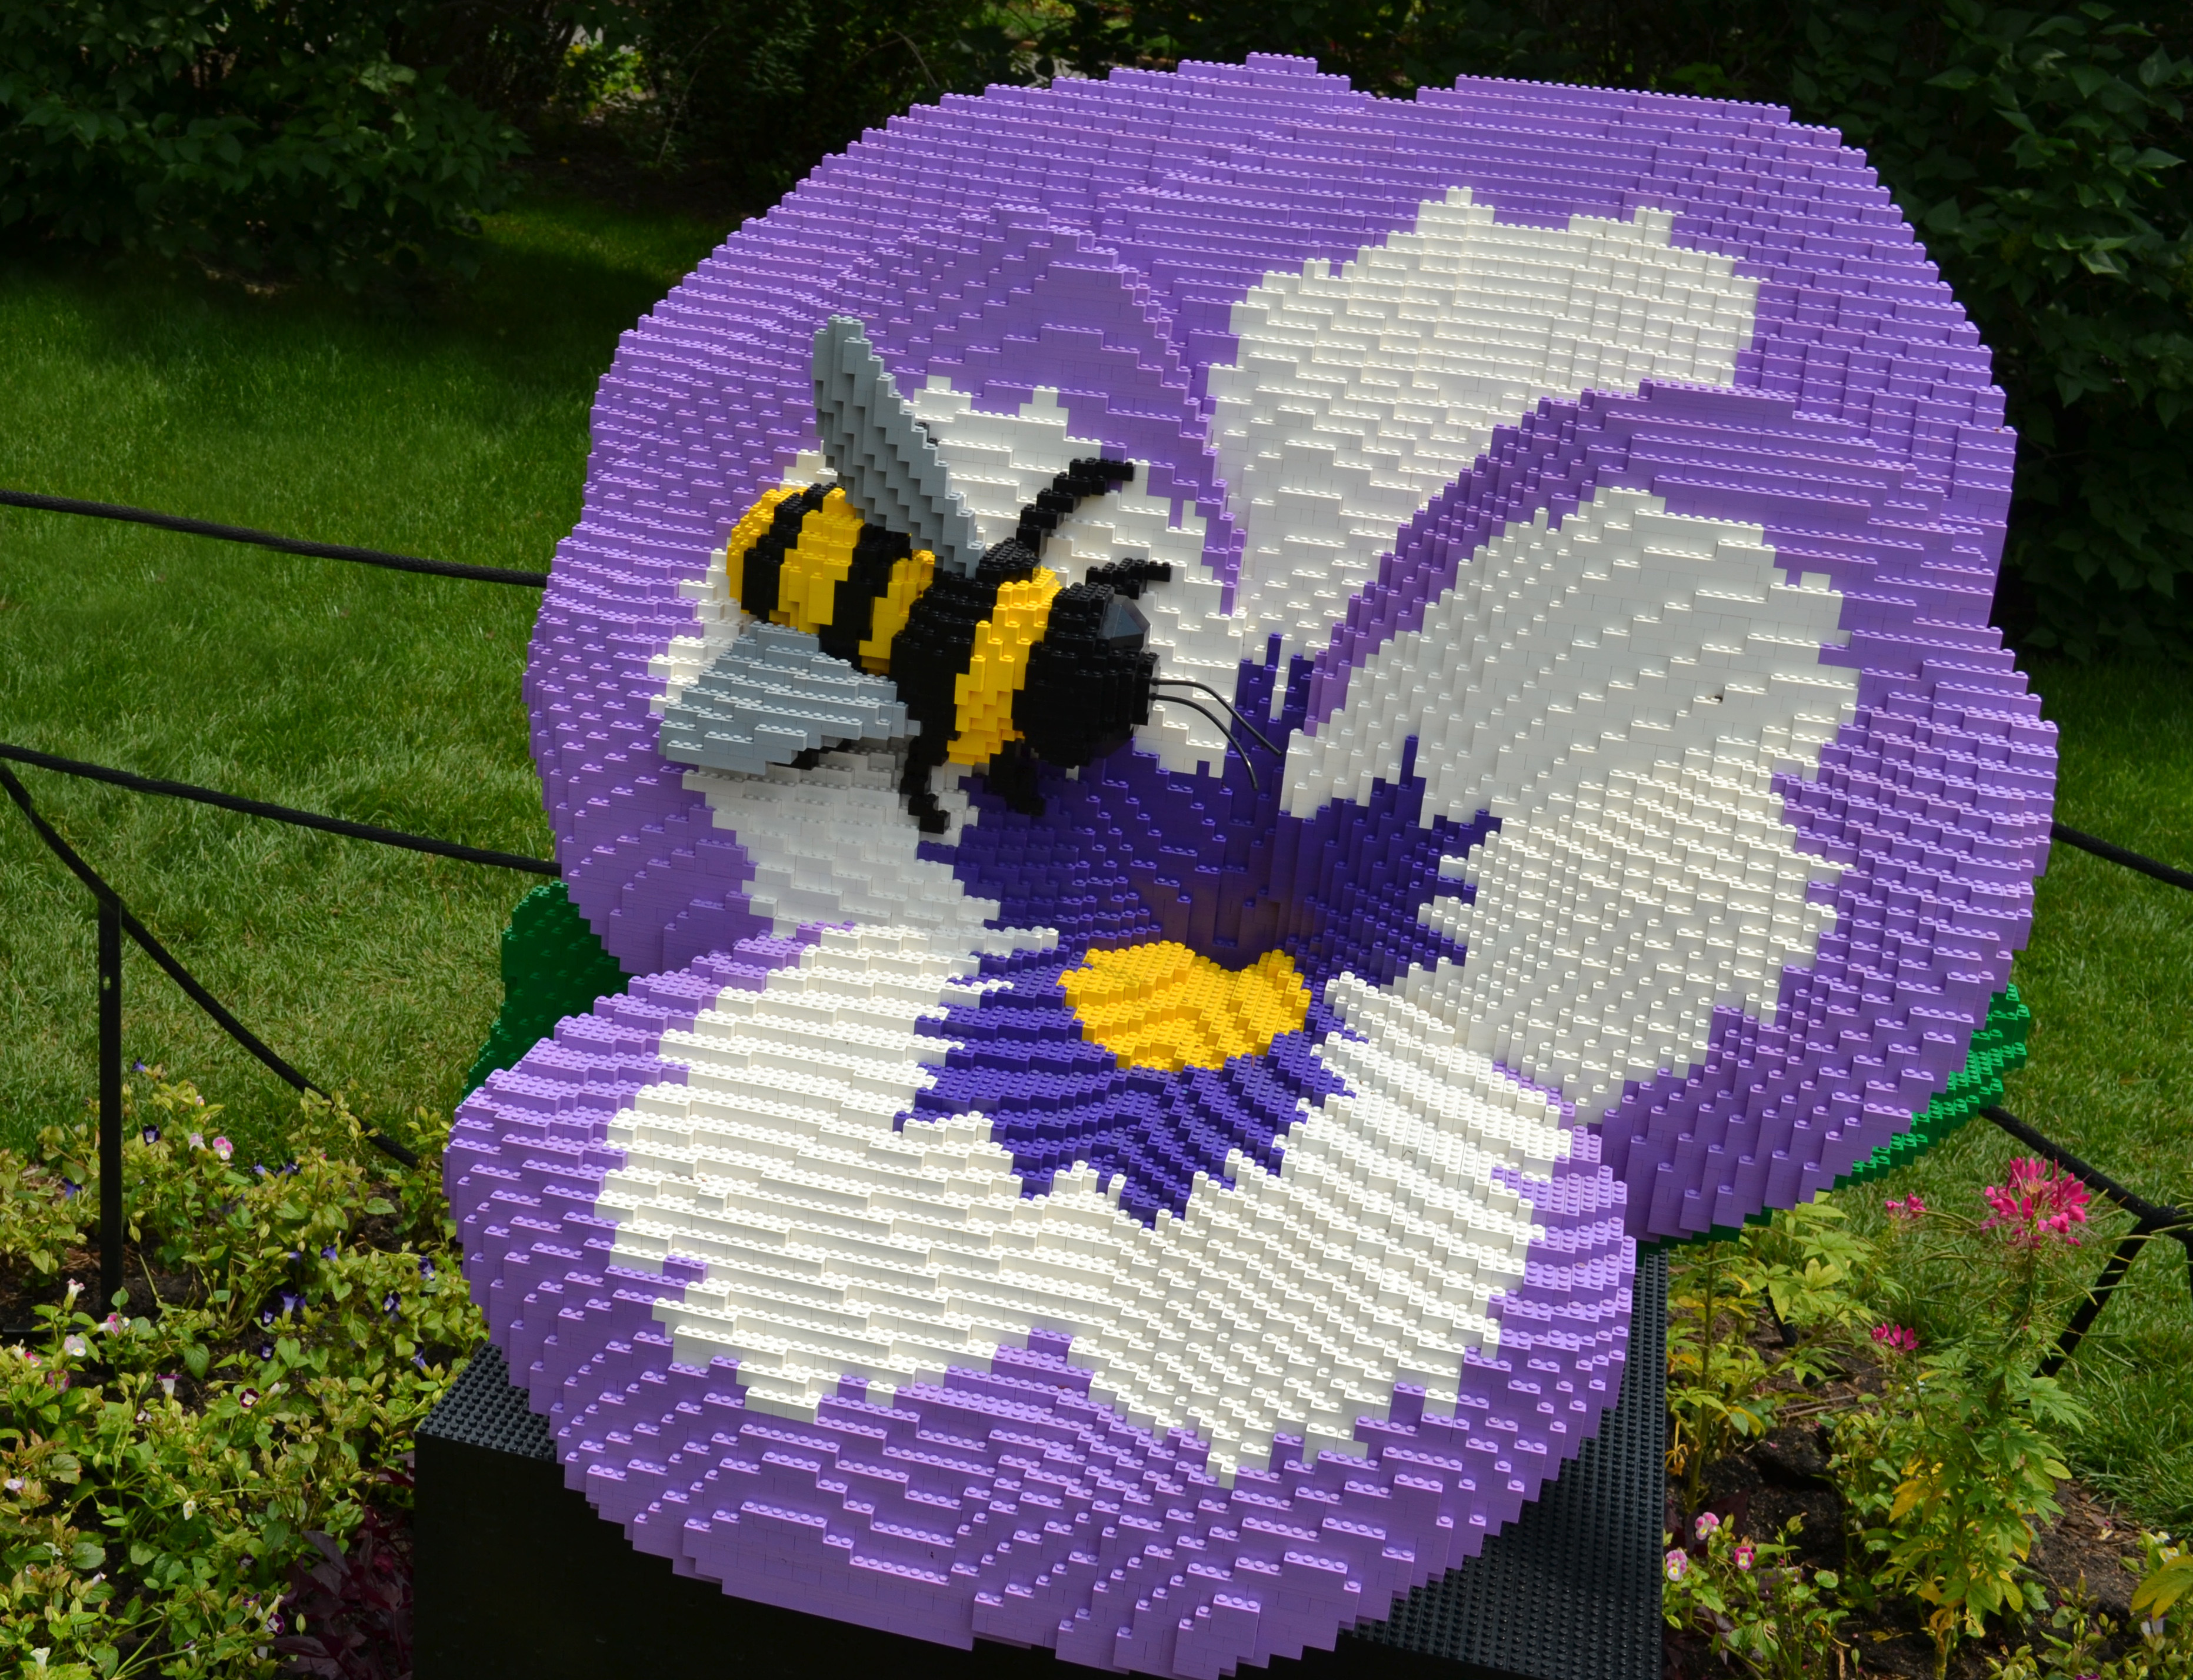 Amazing LEGO creation - Pansy and bee